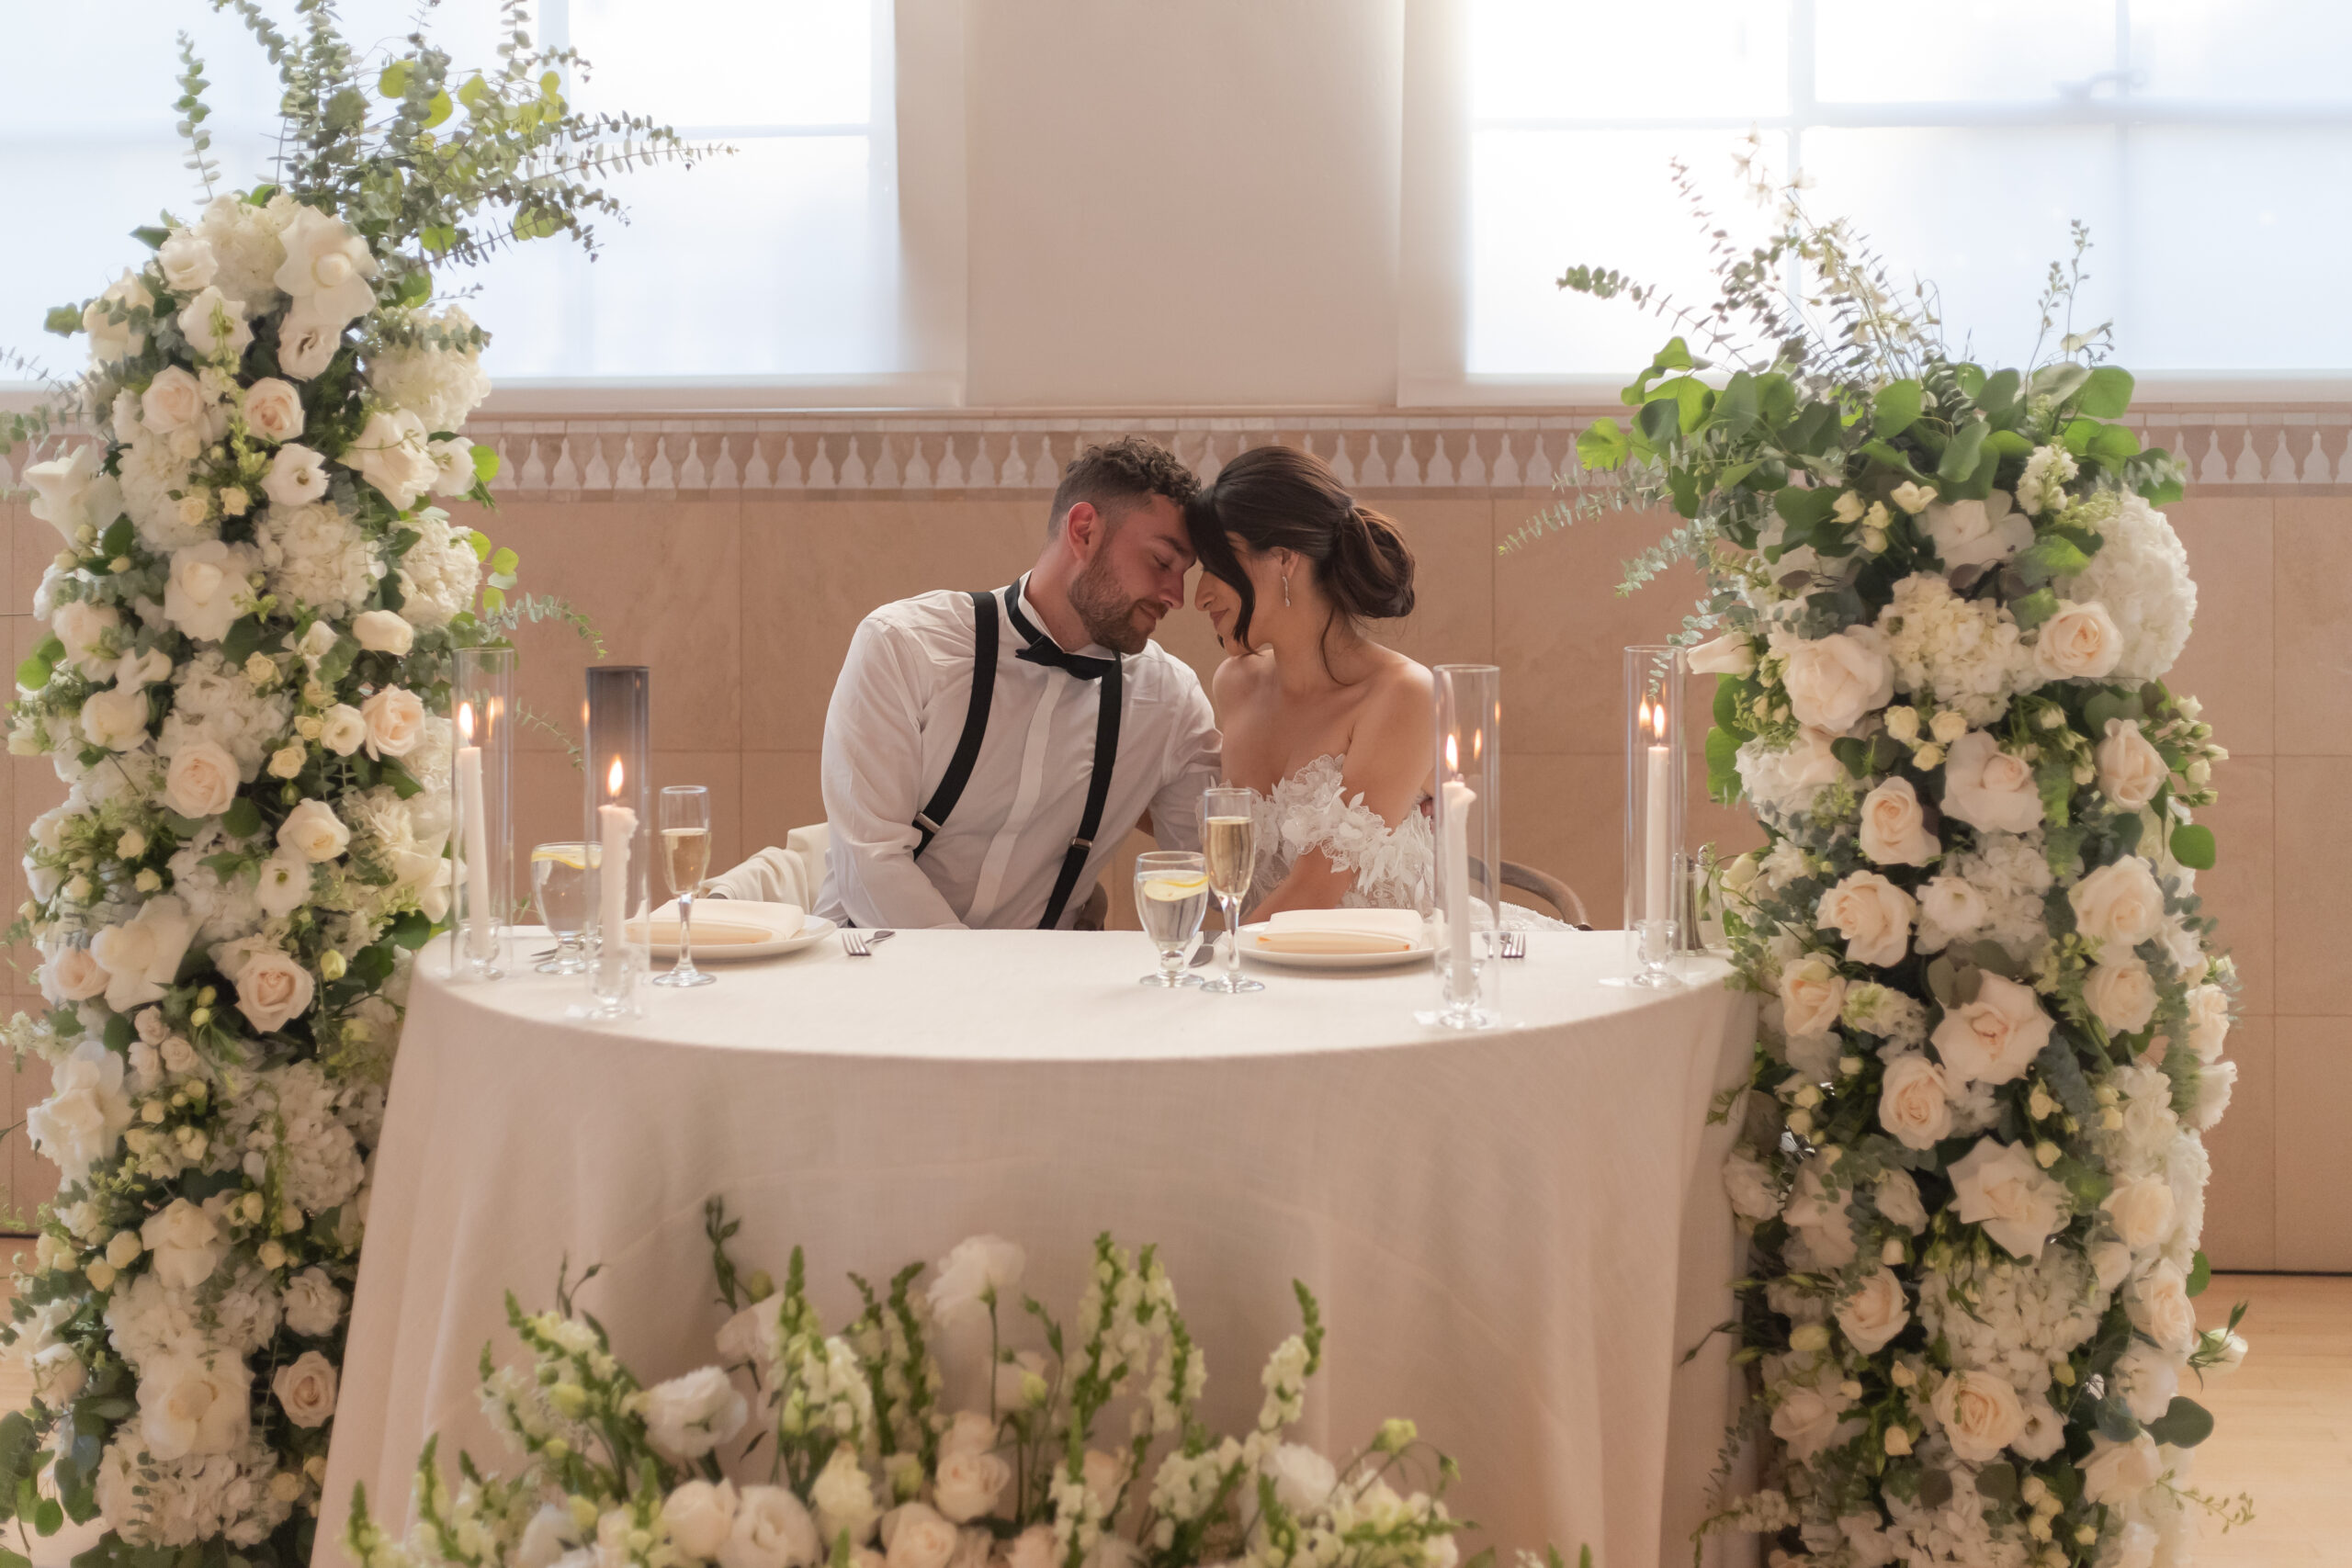 Bride and groom sitting at a neutral white sweetheart table adorned with freestanding white and greenery floral arrangements.